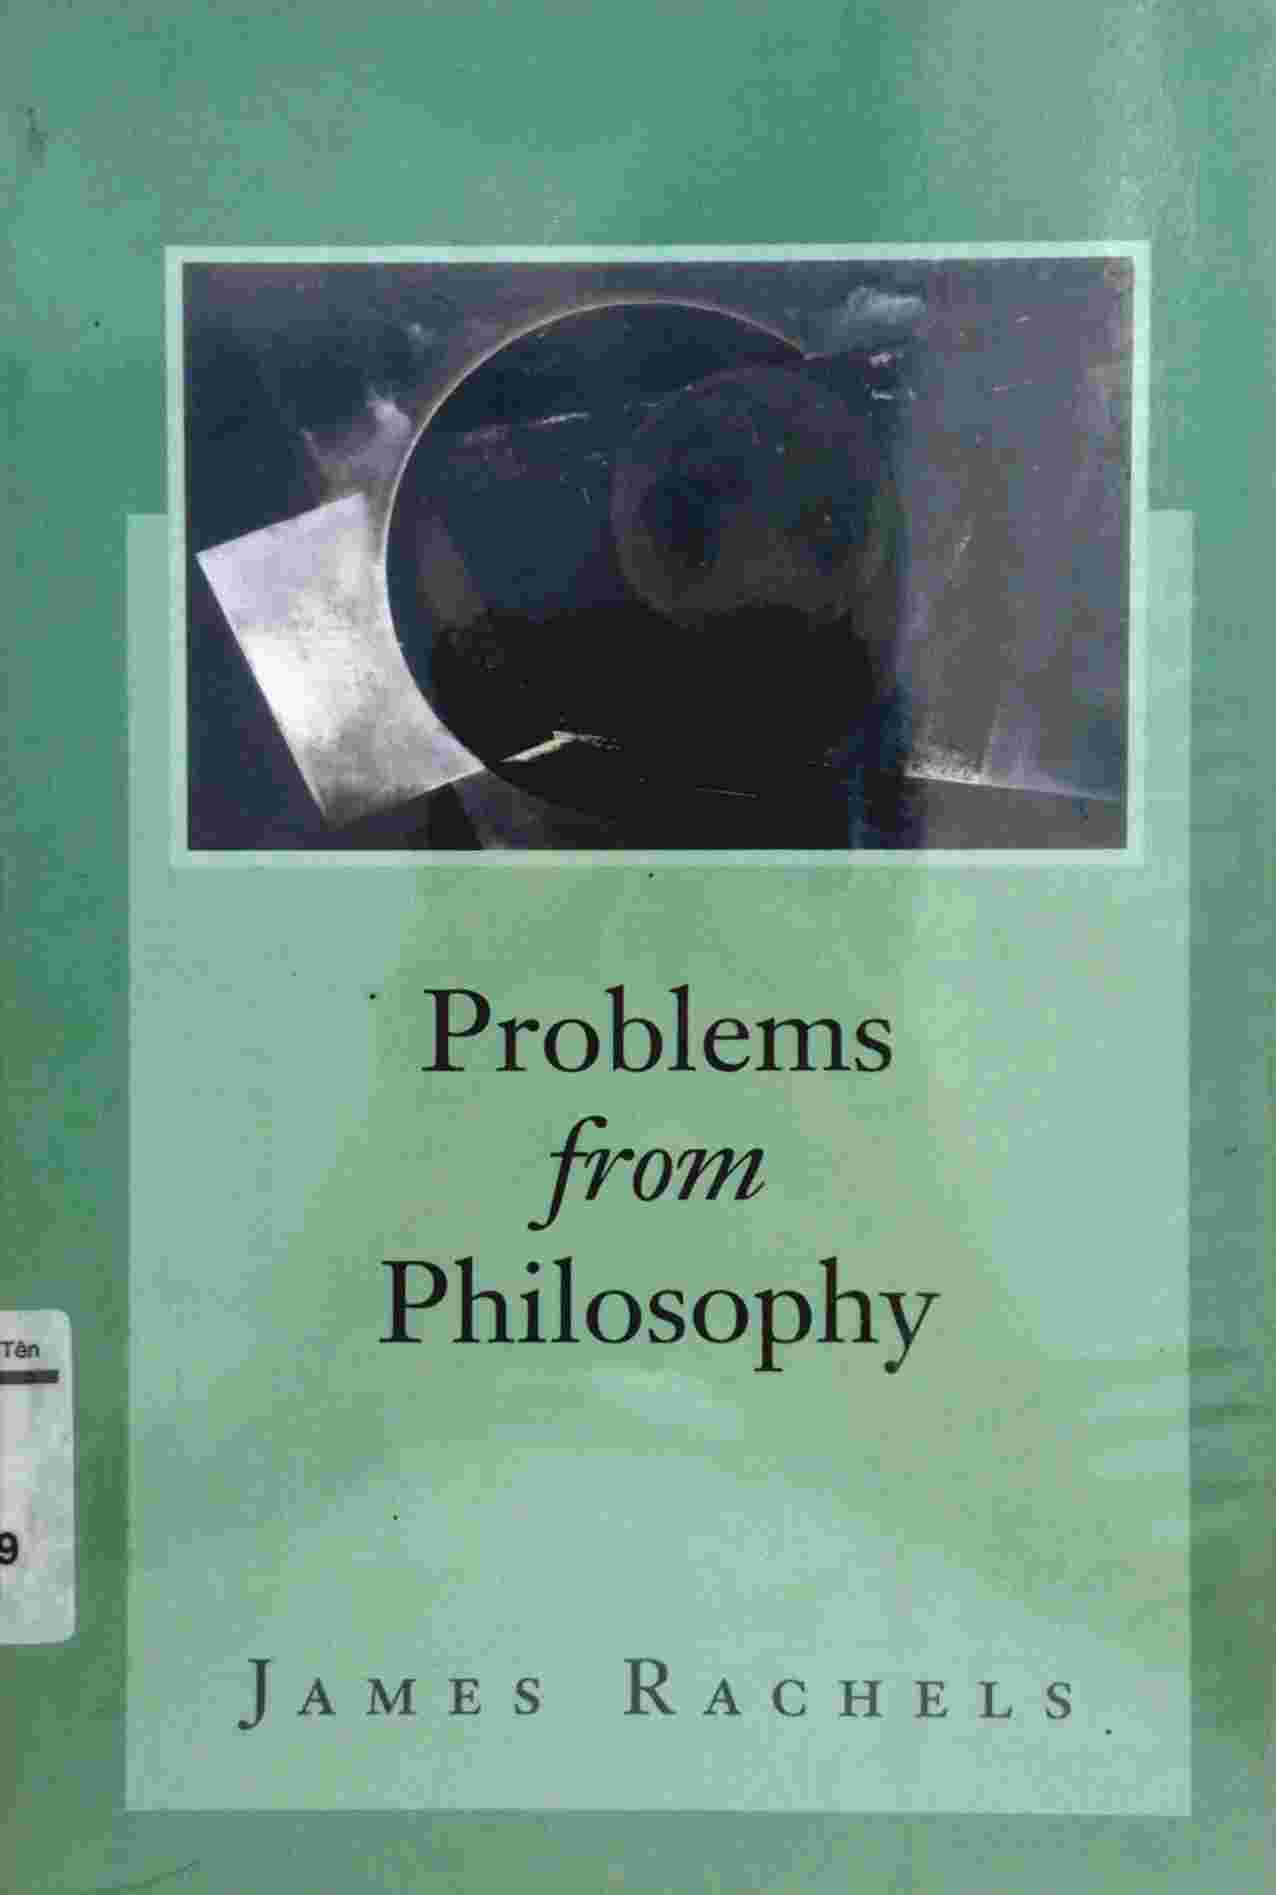 PROBLEMS FROM PHILOSOPHY